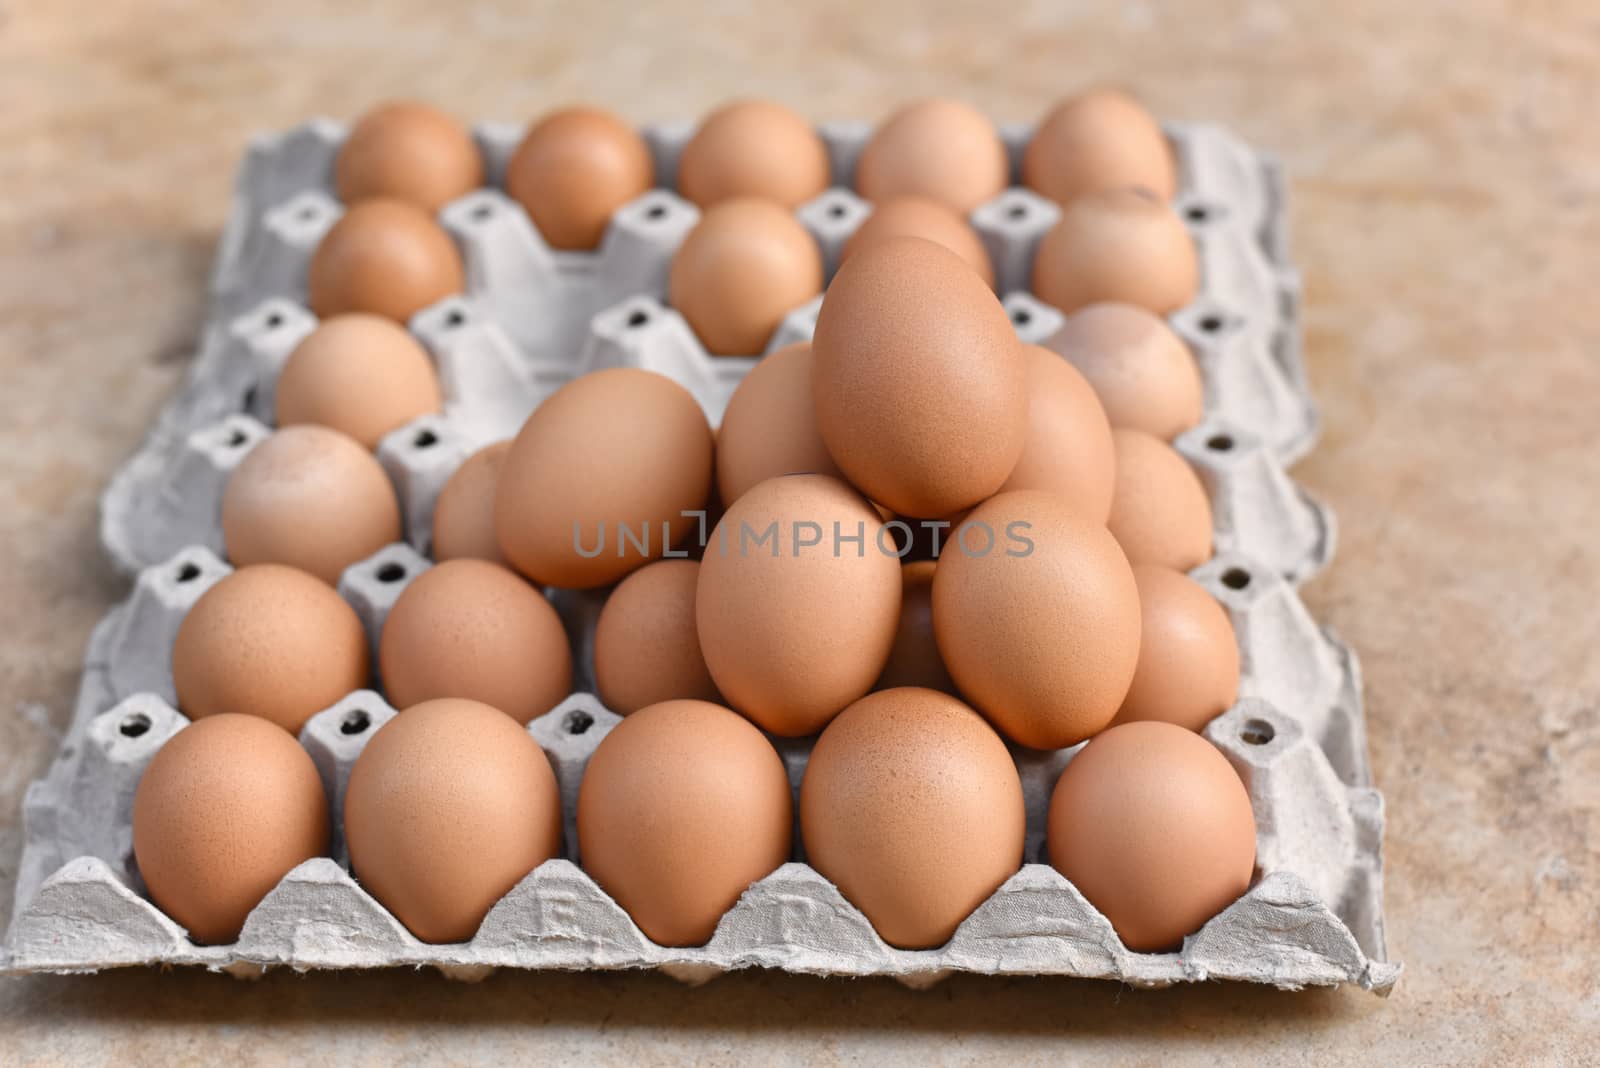 Egg, Chicken Egg. Close-up view of raw Brown chicken eggs in egg box on Cement floor background. Selected focus